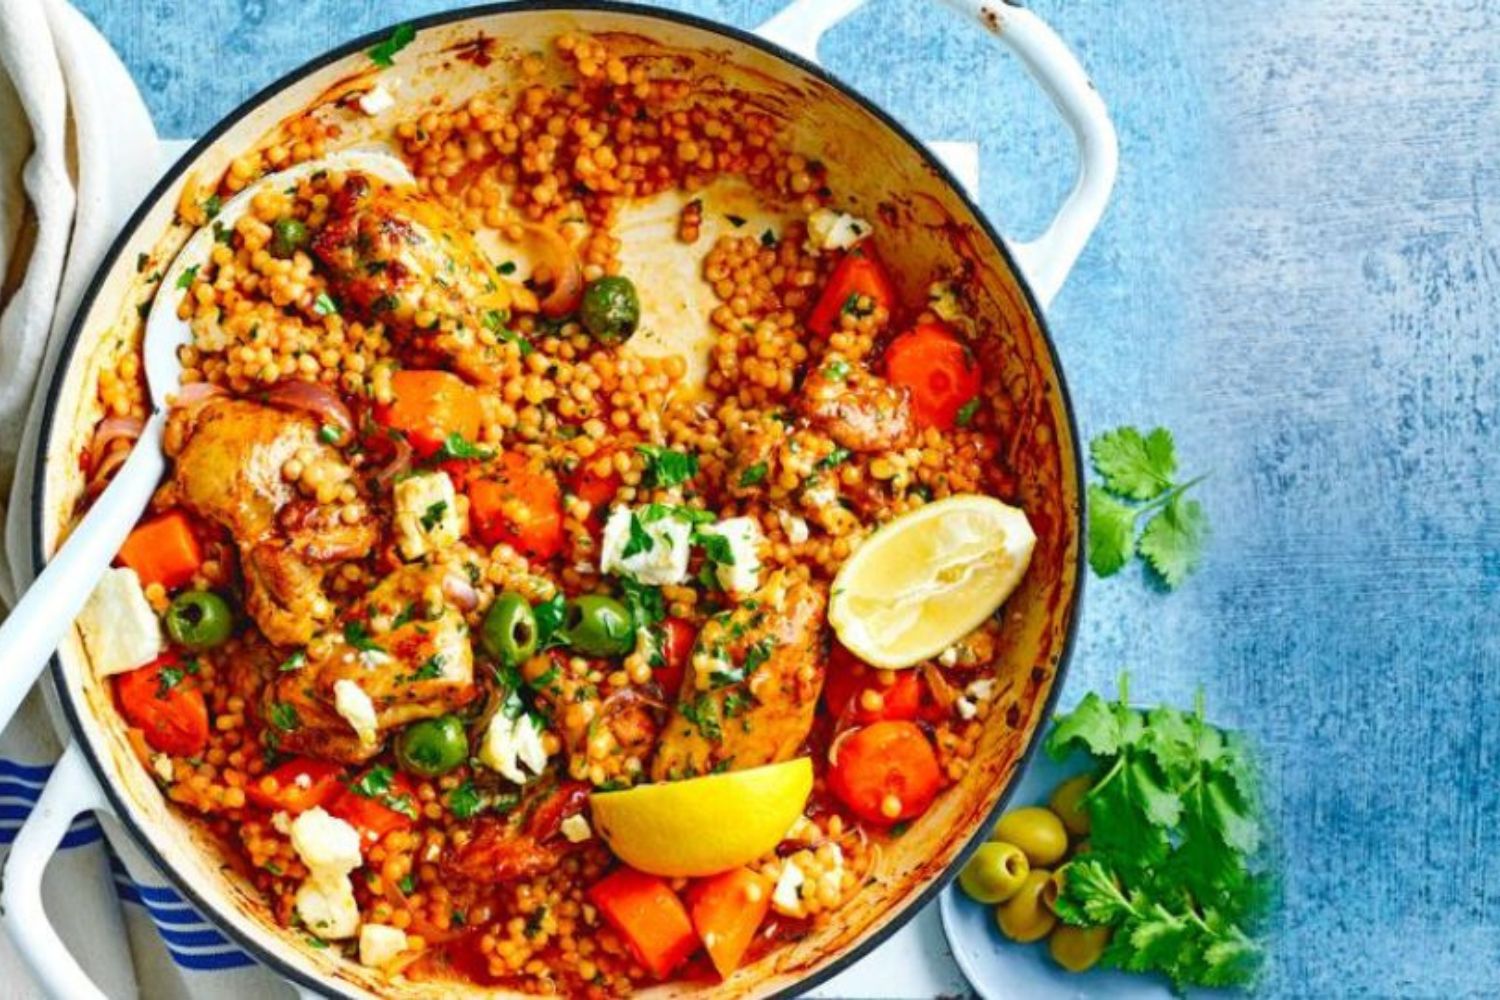 baked-moroccan-chicken-and-pearl-couscous-recipe